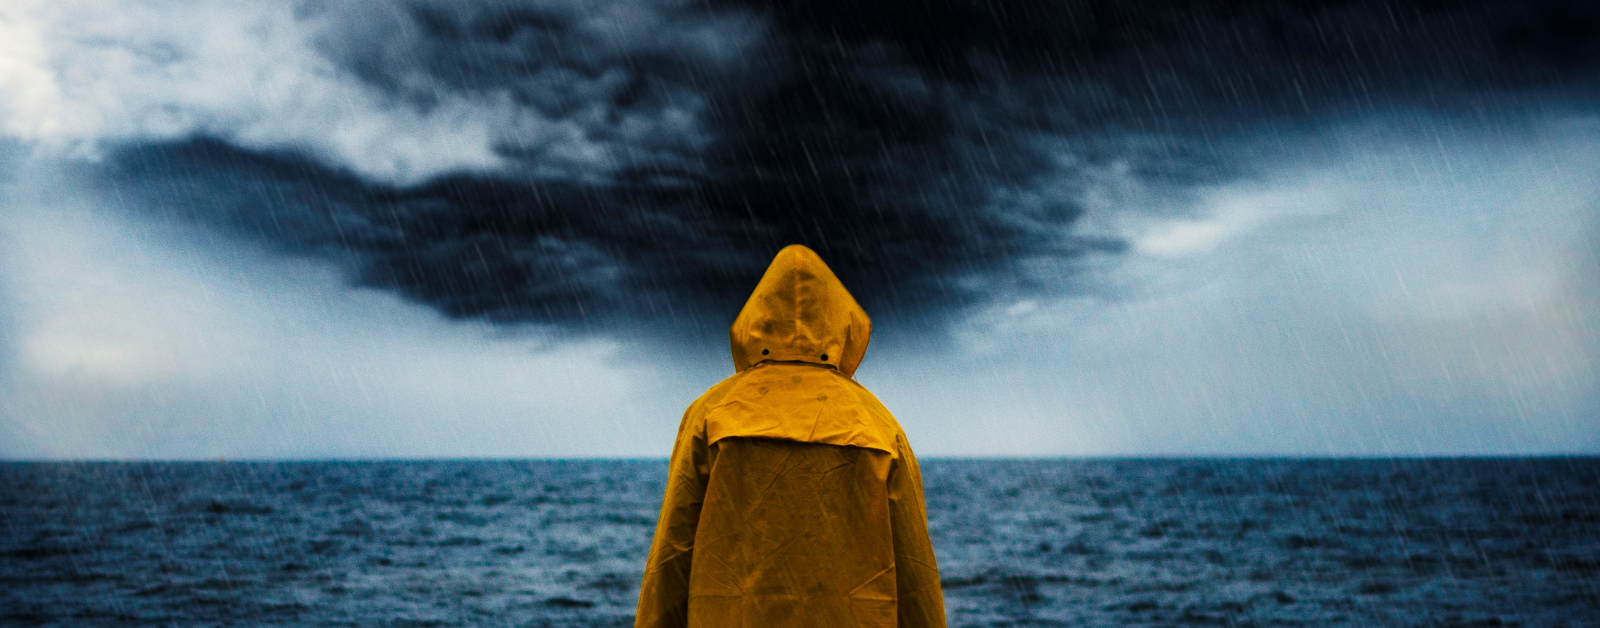 person wearing a yellow raincoat looking out at sea at an approaching storm, waiting